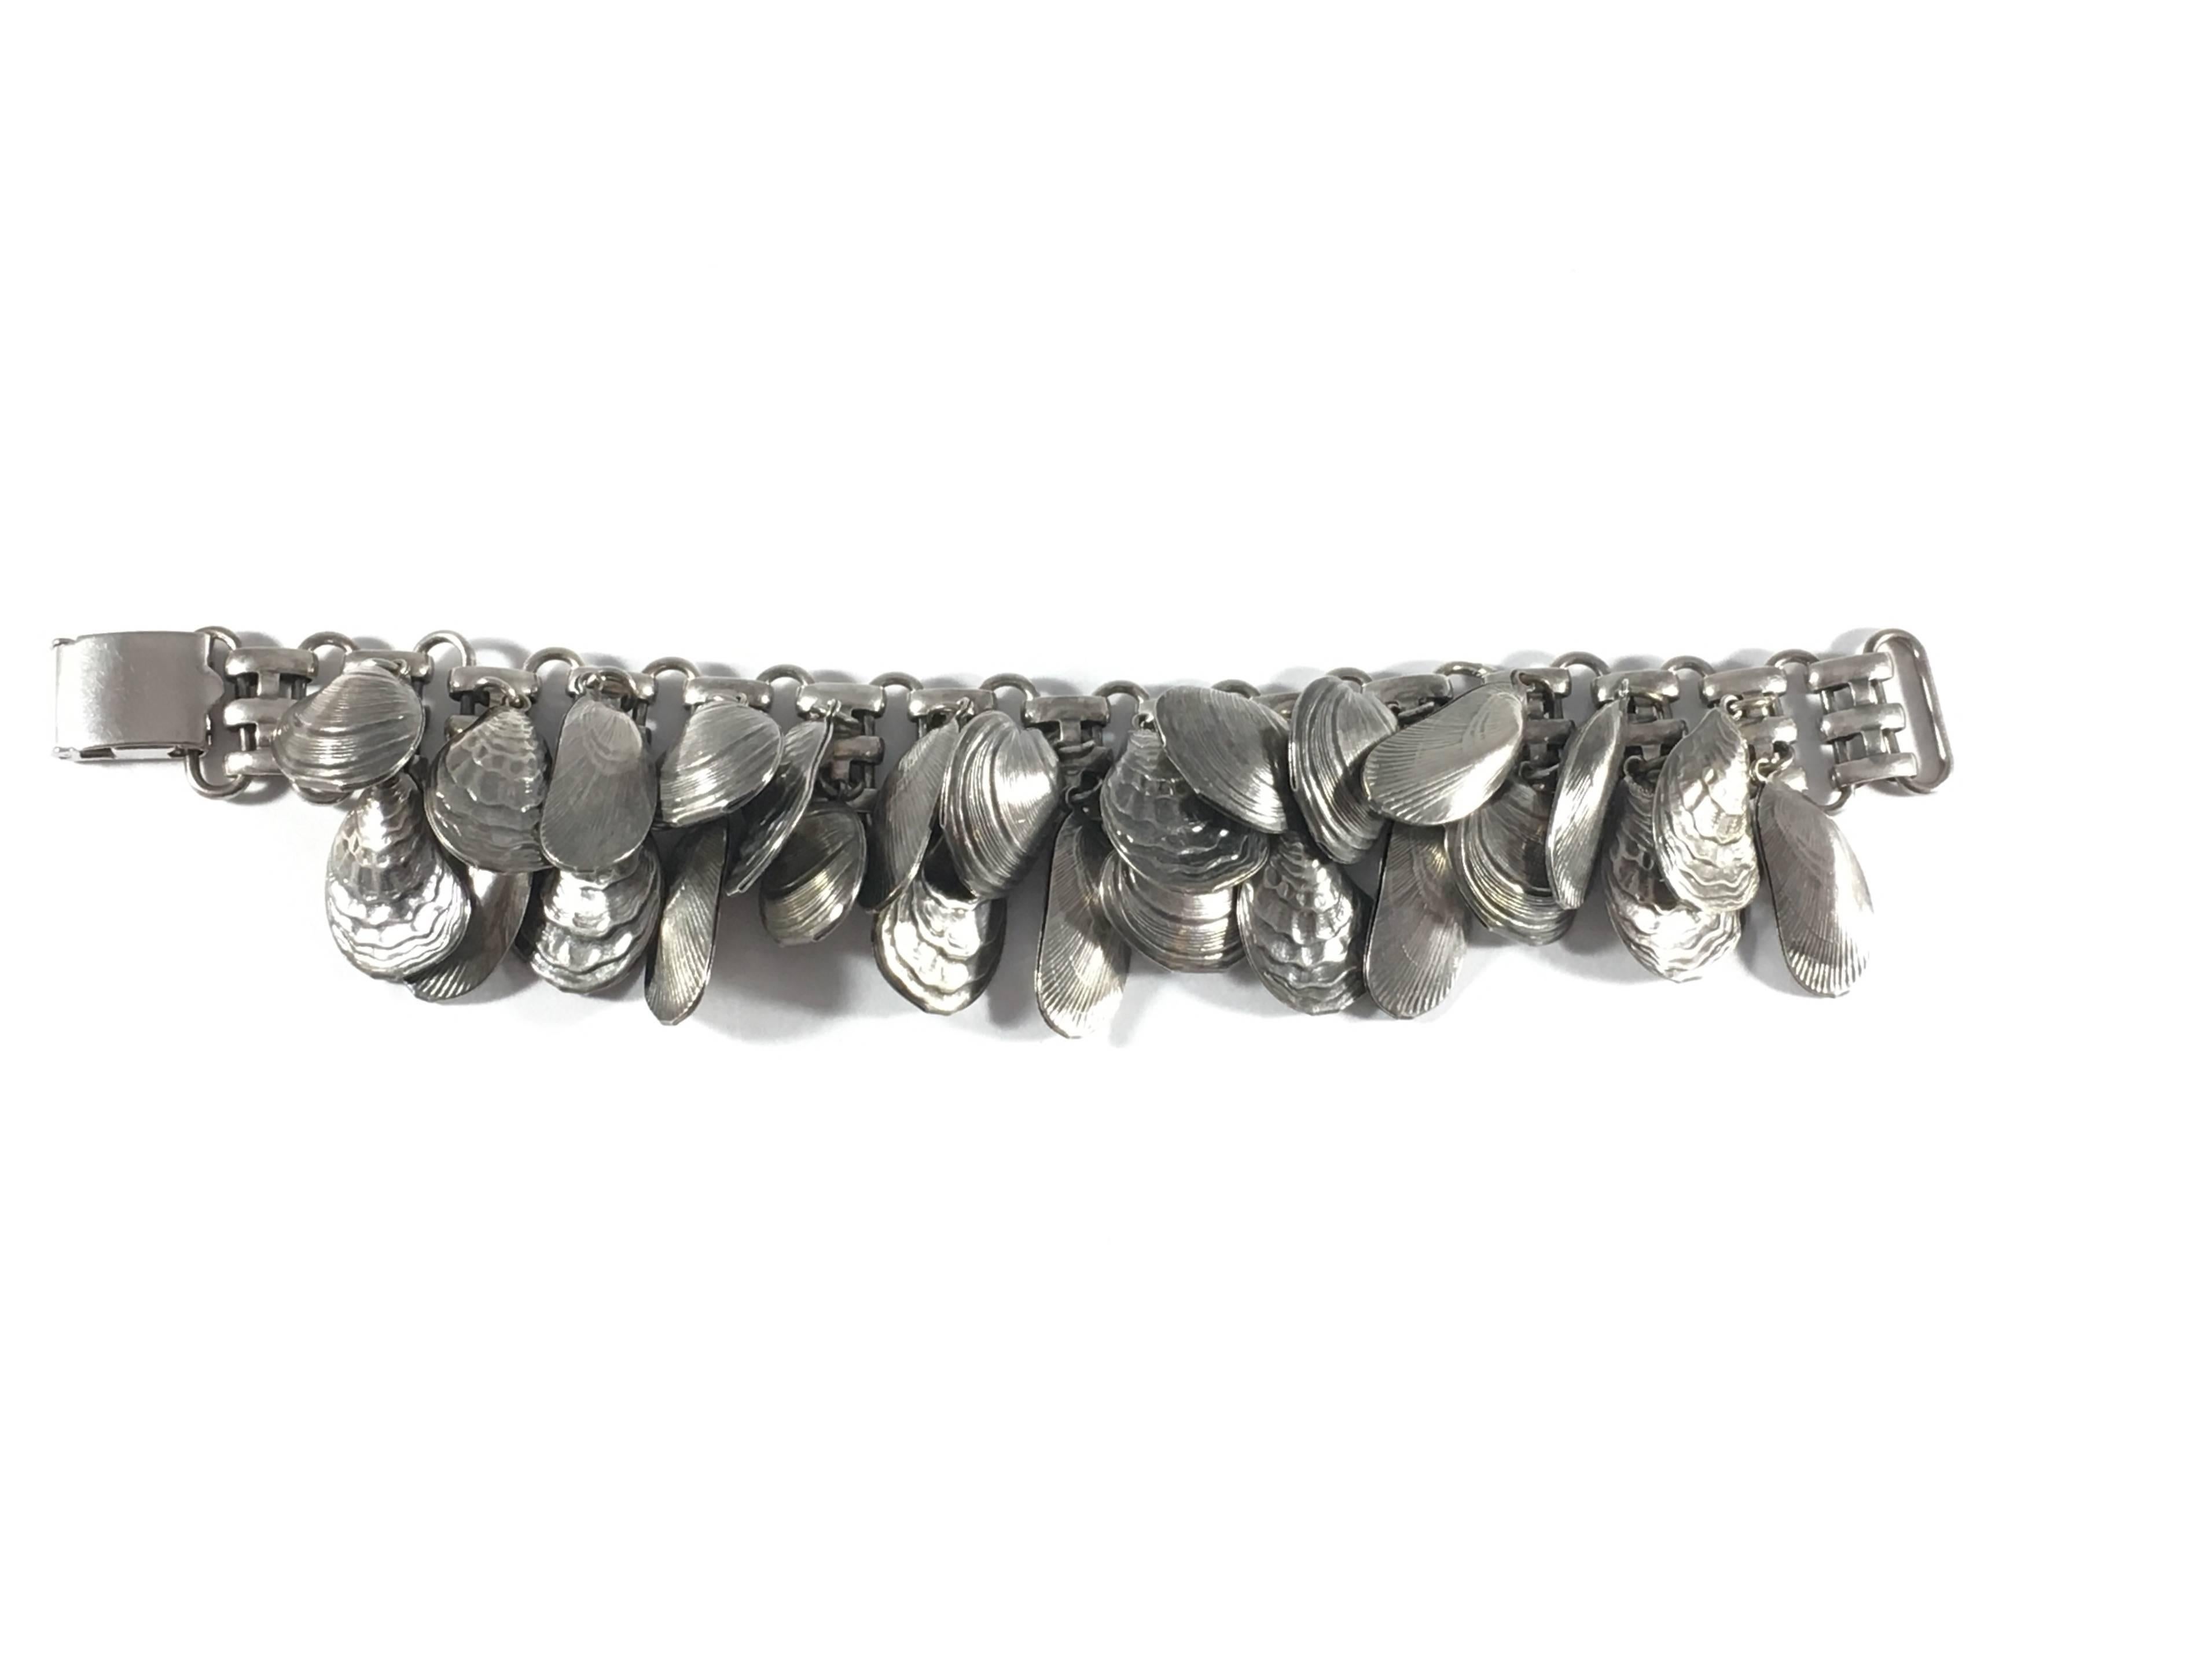 This is an amazing Napier silver-tone shell charm bracelet from the 1950s. The silver-tone ones are harder to find than the gold-tone ones. It measures 7 1/2 inches long and 1 1/2 inches wide at its widest point. There are three different kinds of